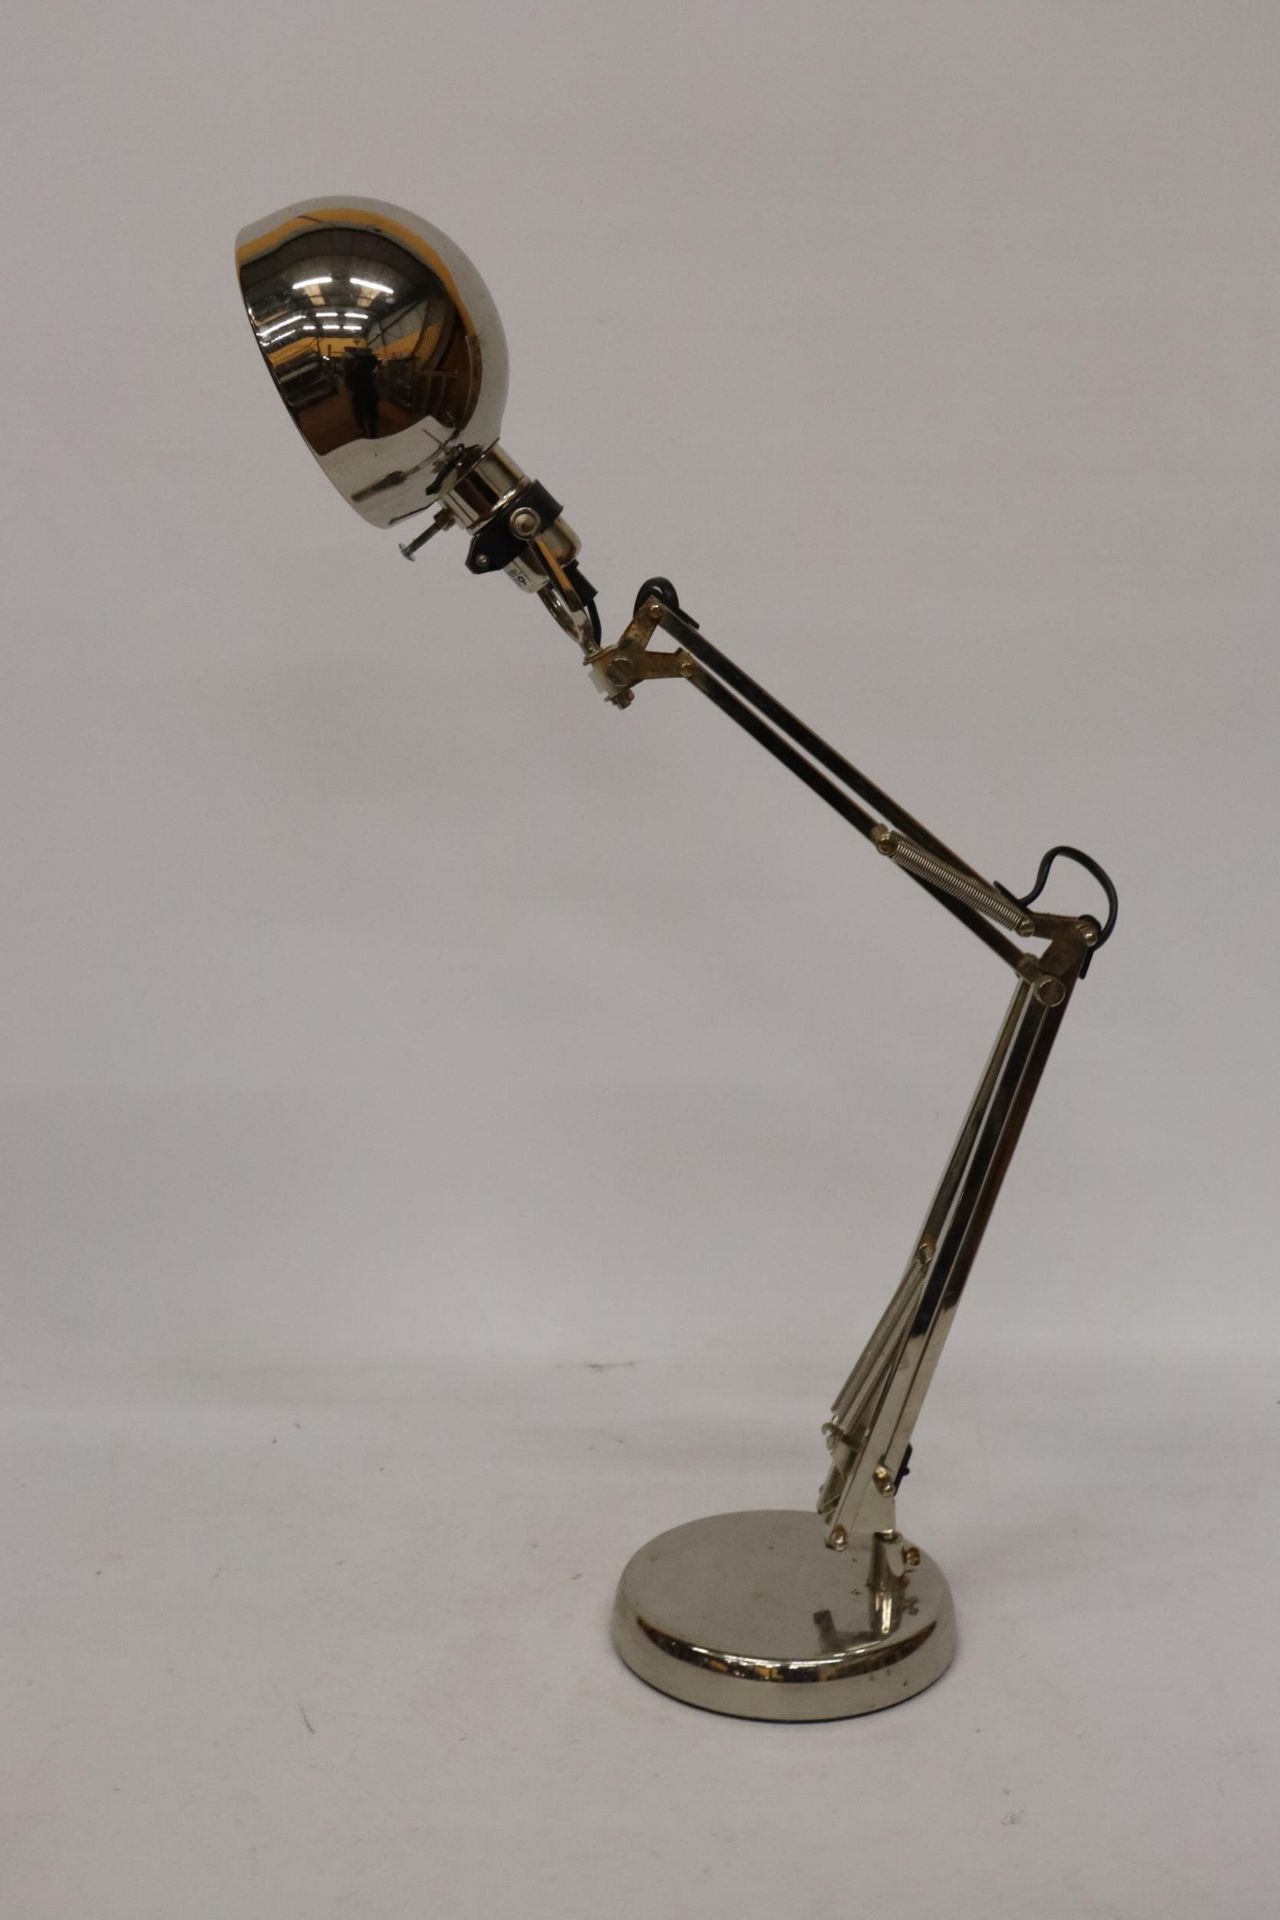 A HEAVY CHROME VINTAGE ANGLEPOISE LAMP - Image 4 of 5